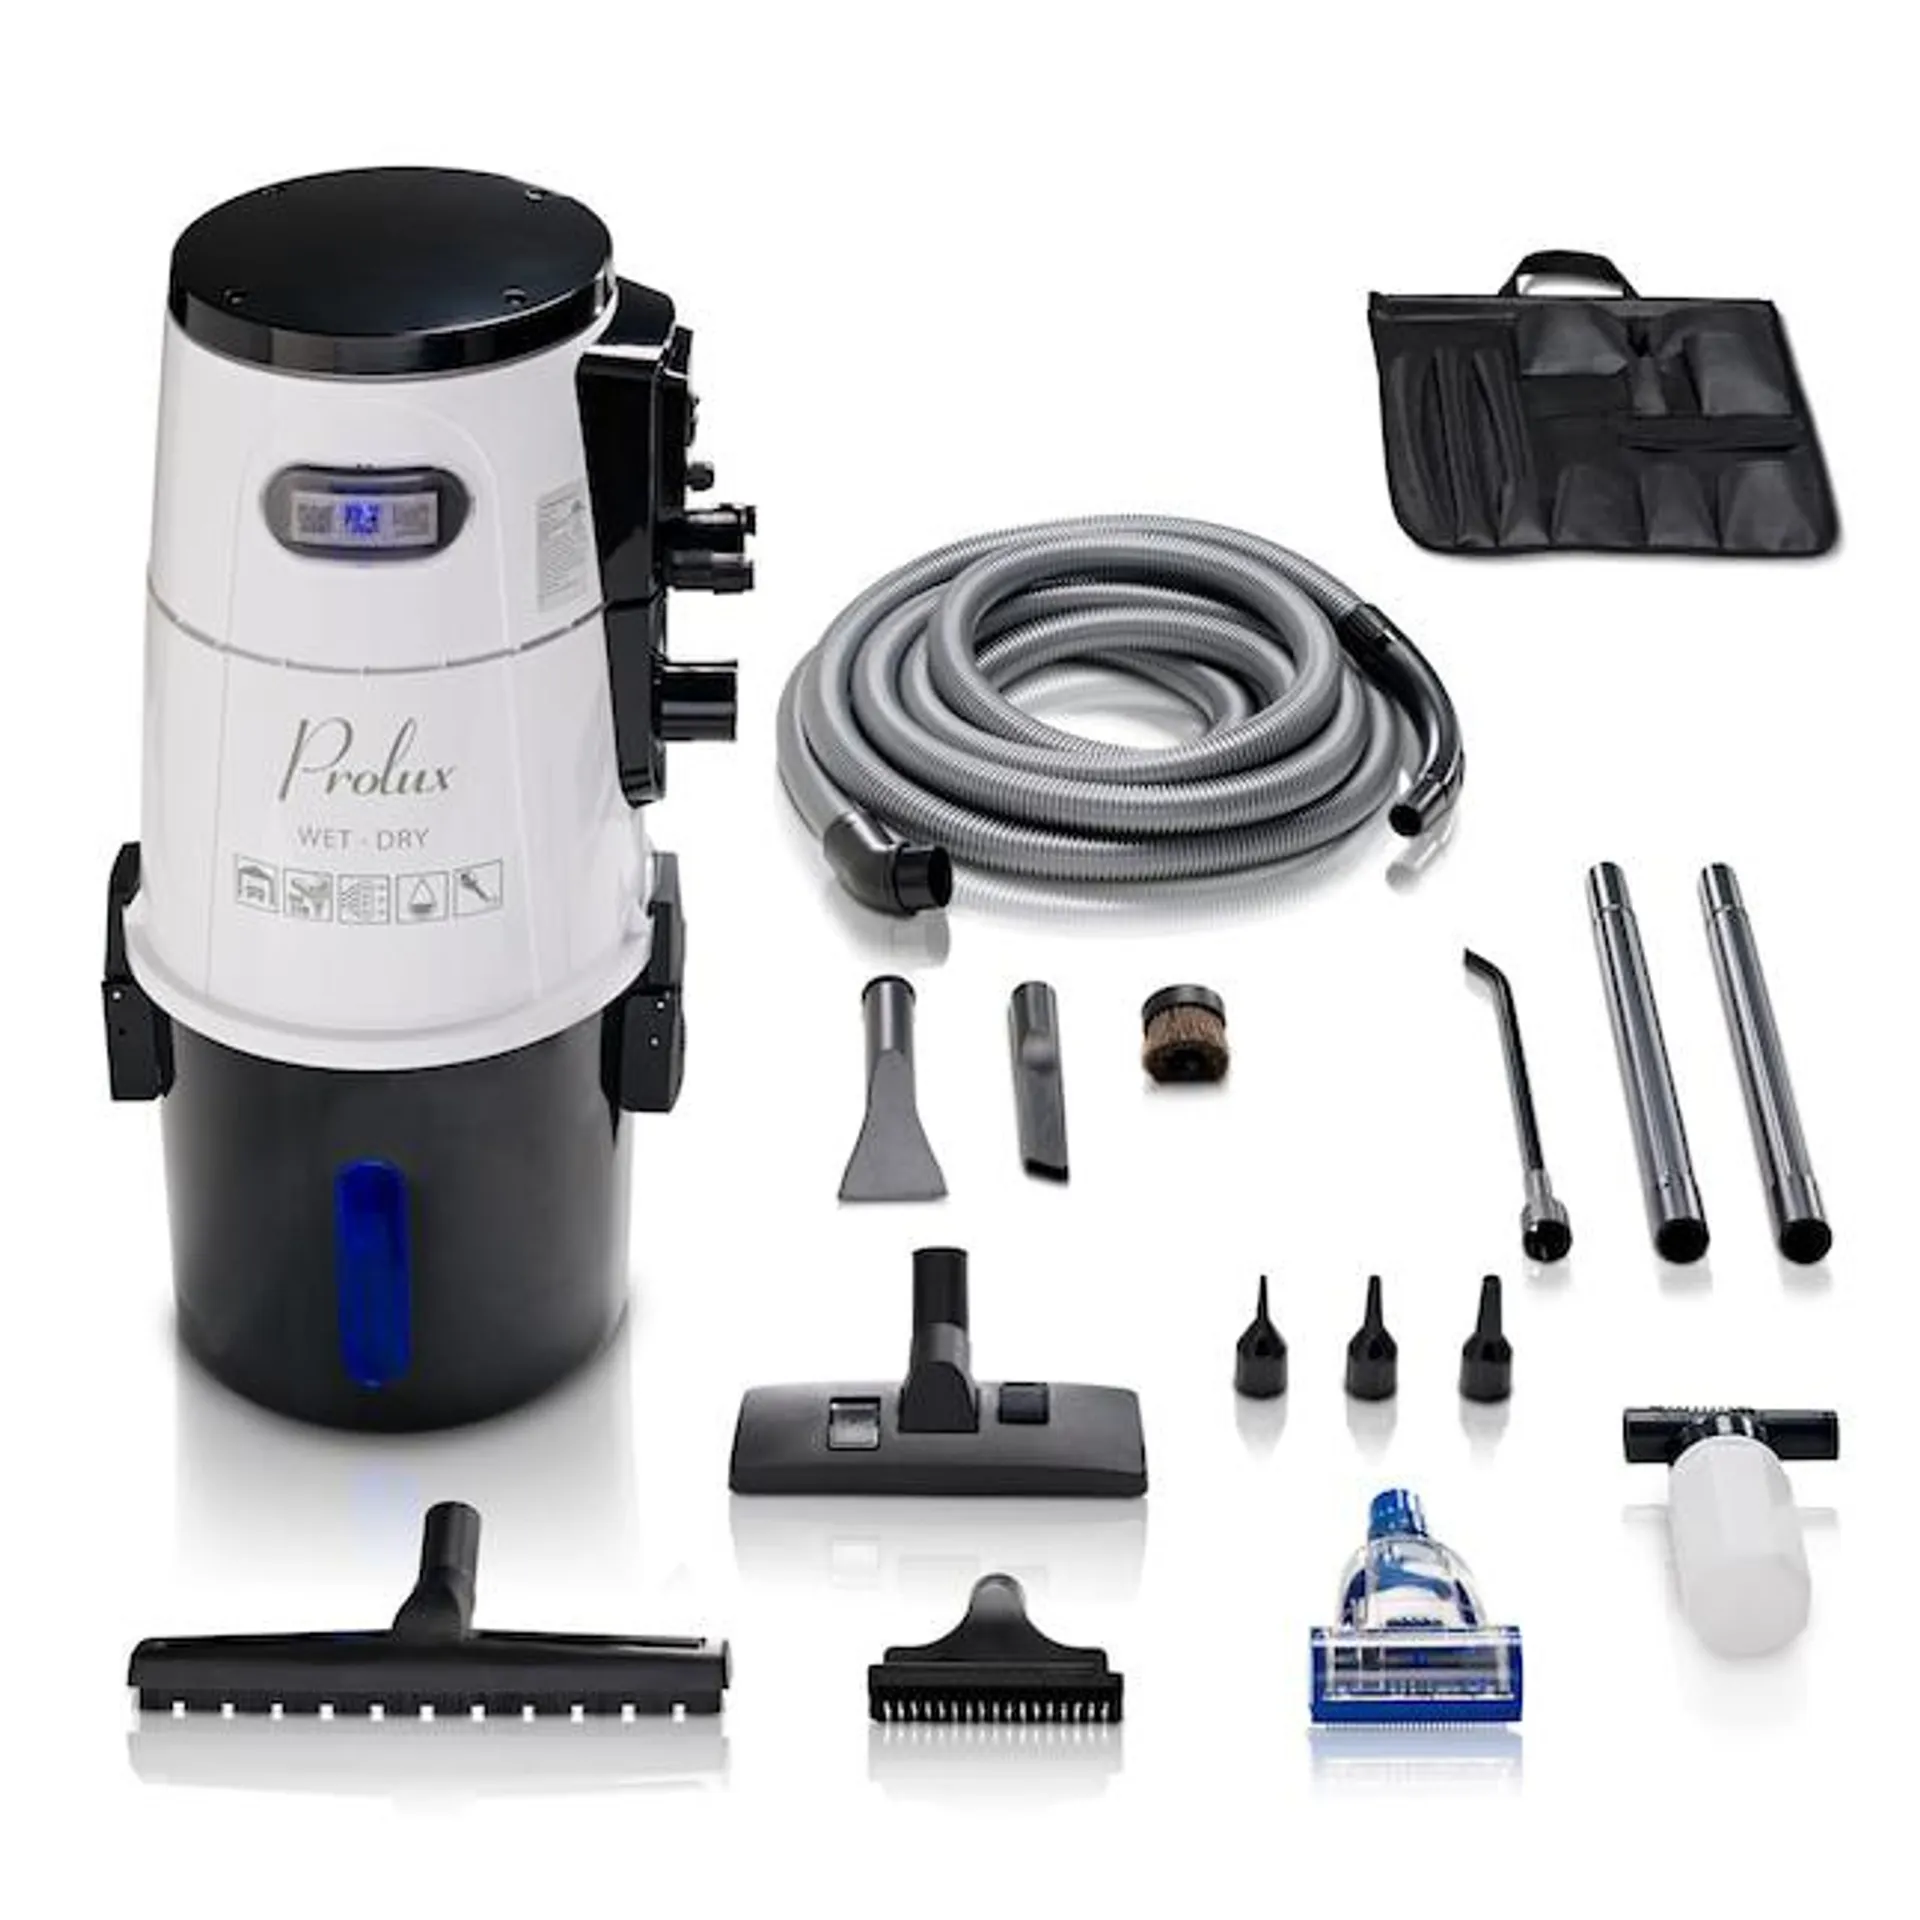 Prolux 5.3-Gallons 6.5-HP Corded Wet/Dry Shop Vacuum with Accessories Included